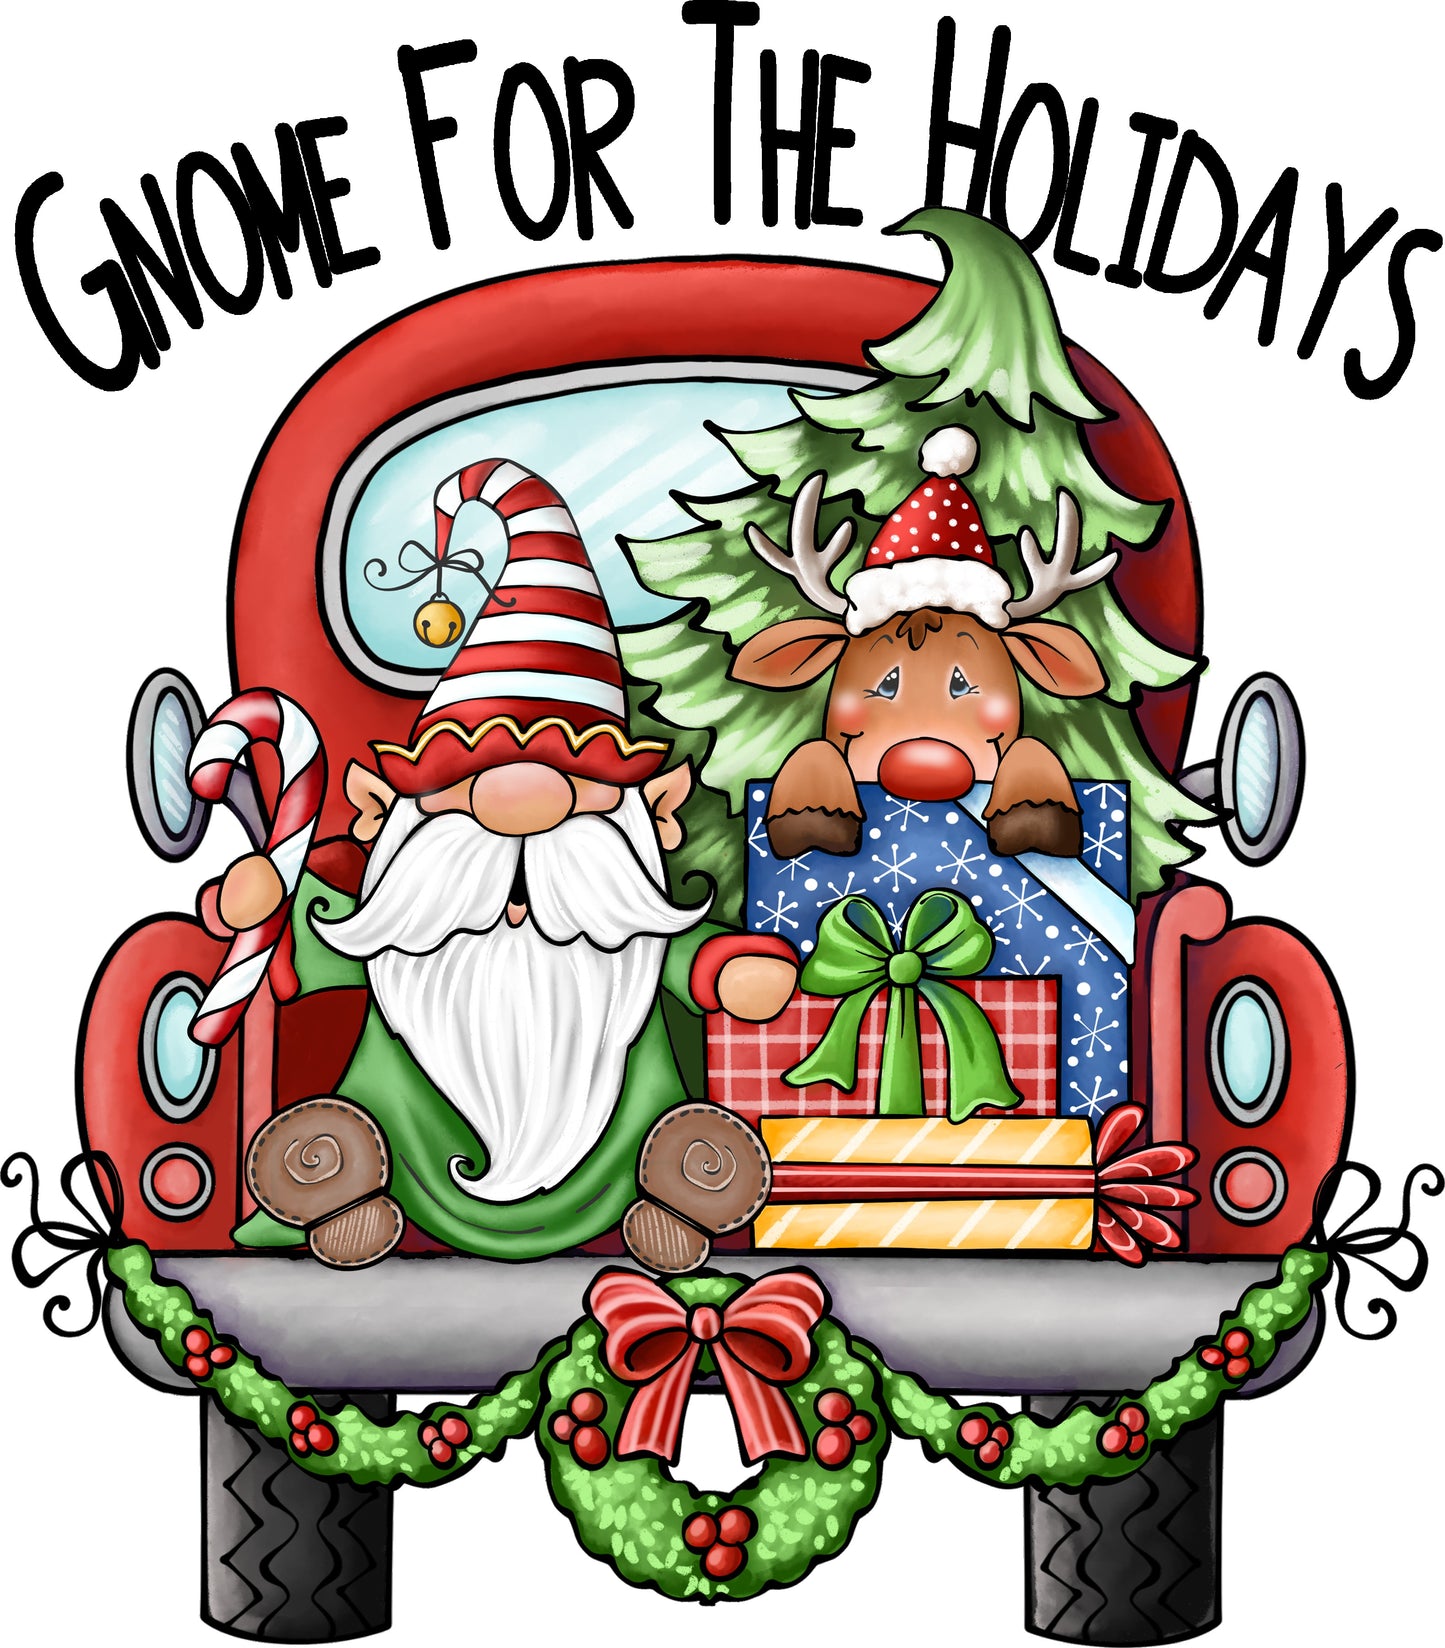 Gnome for the Holidays 2 - Out of the Wood